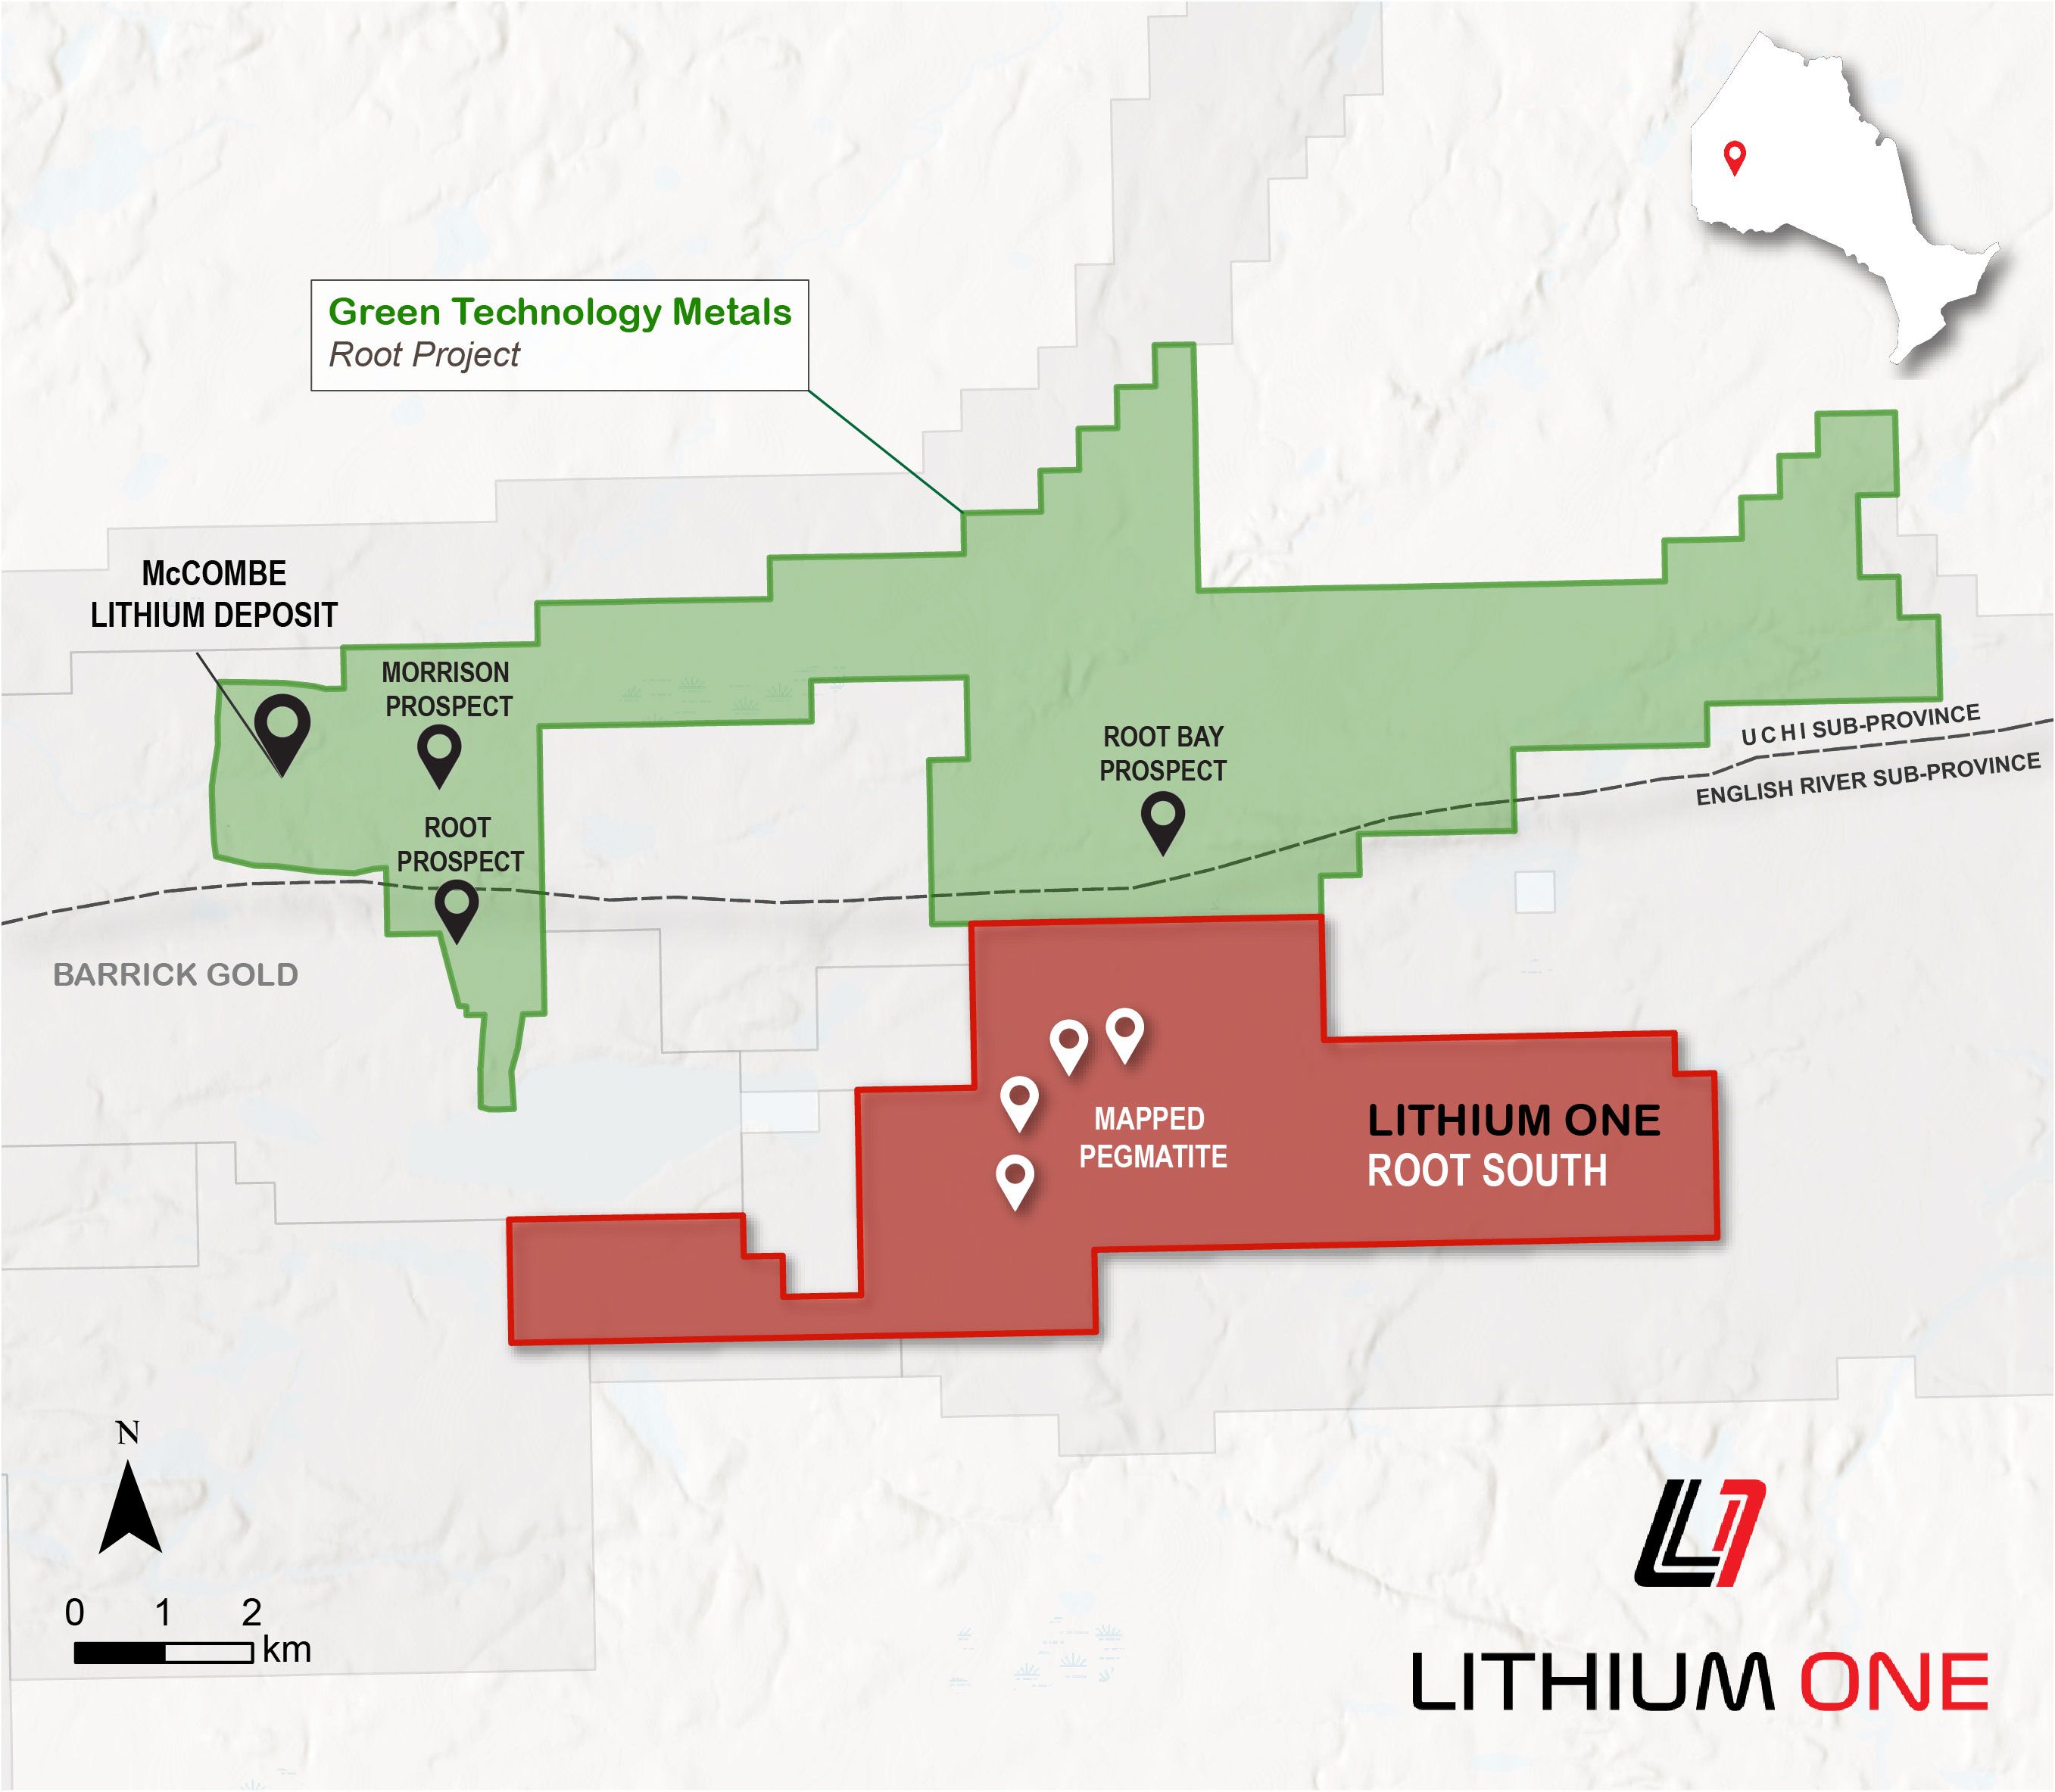 Lithium One’s Root South Lithium Property showing the location of mapped pegmatites and Green Technology Metals Root Project and McCombe Lithium Deposit.